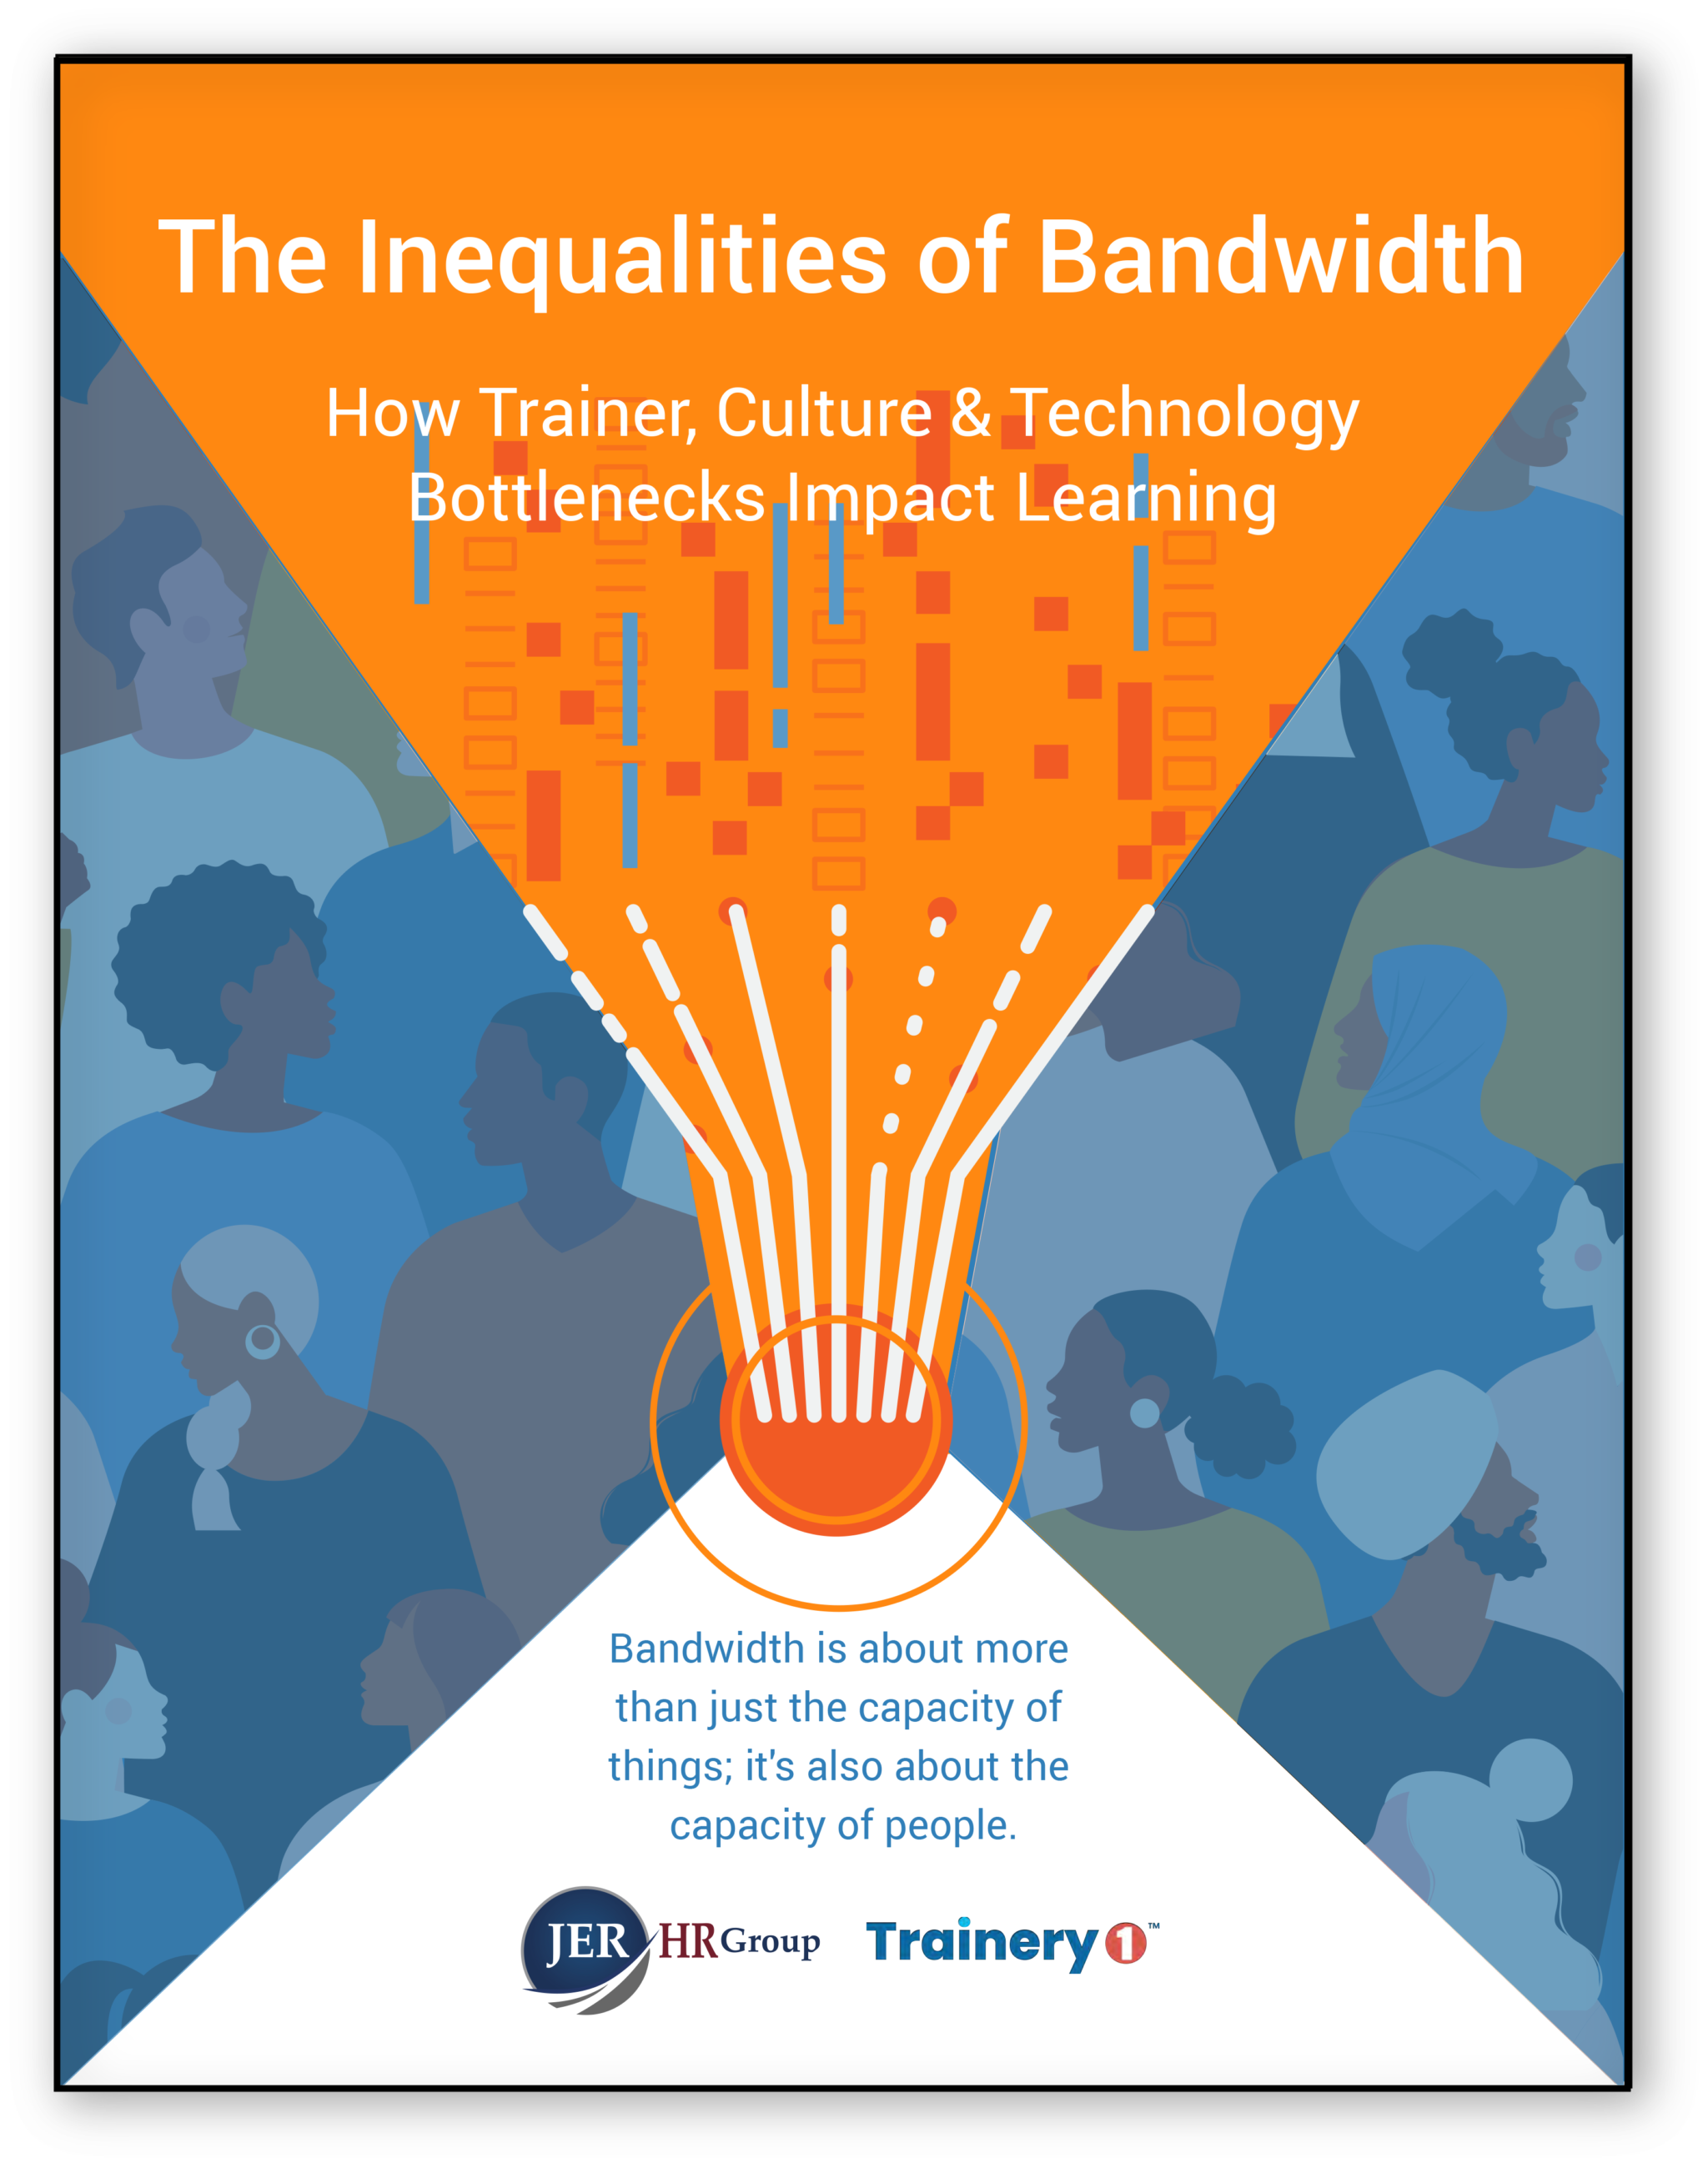 The Inequalities of Bandwidth: How Trainer, Culture & Technology Bottlenecks Impact Learning